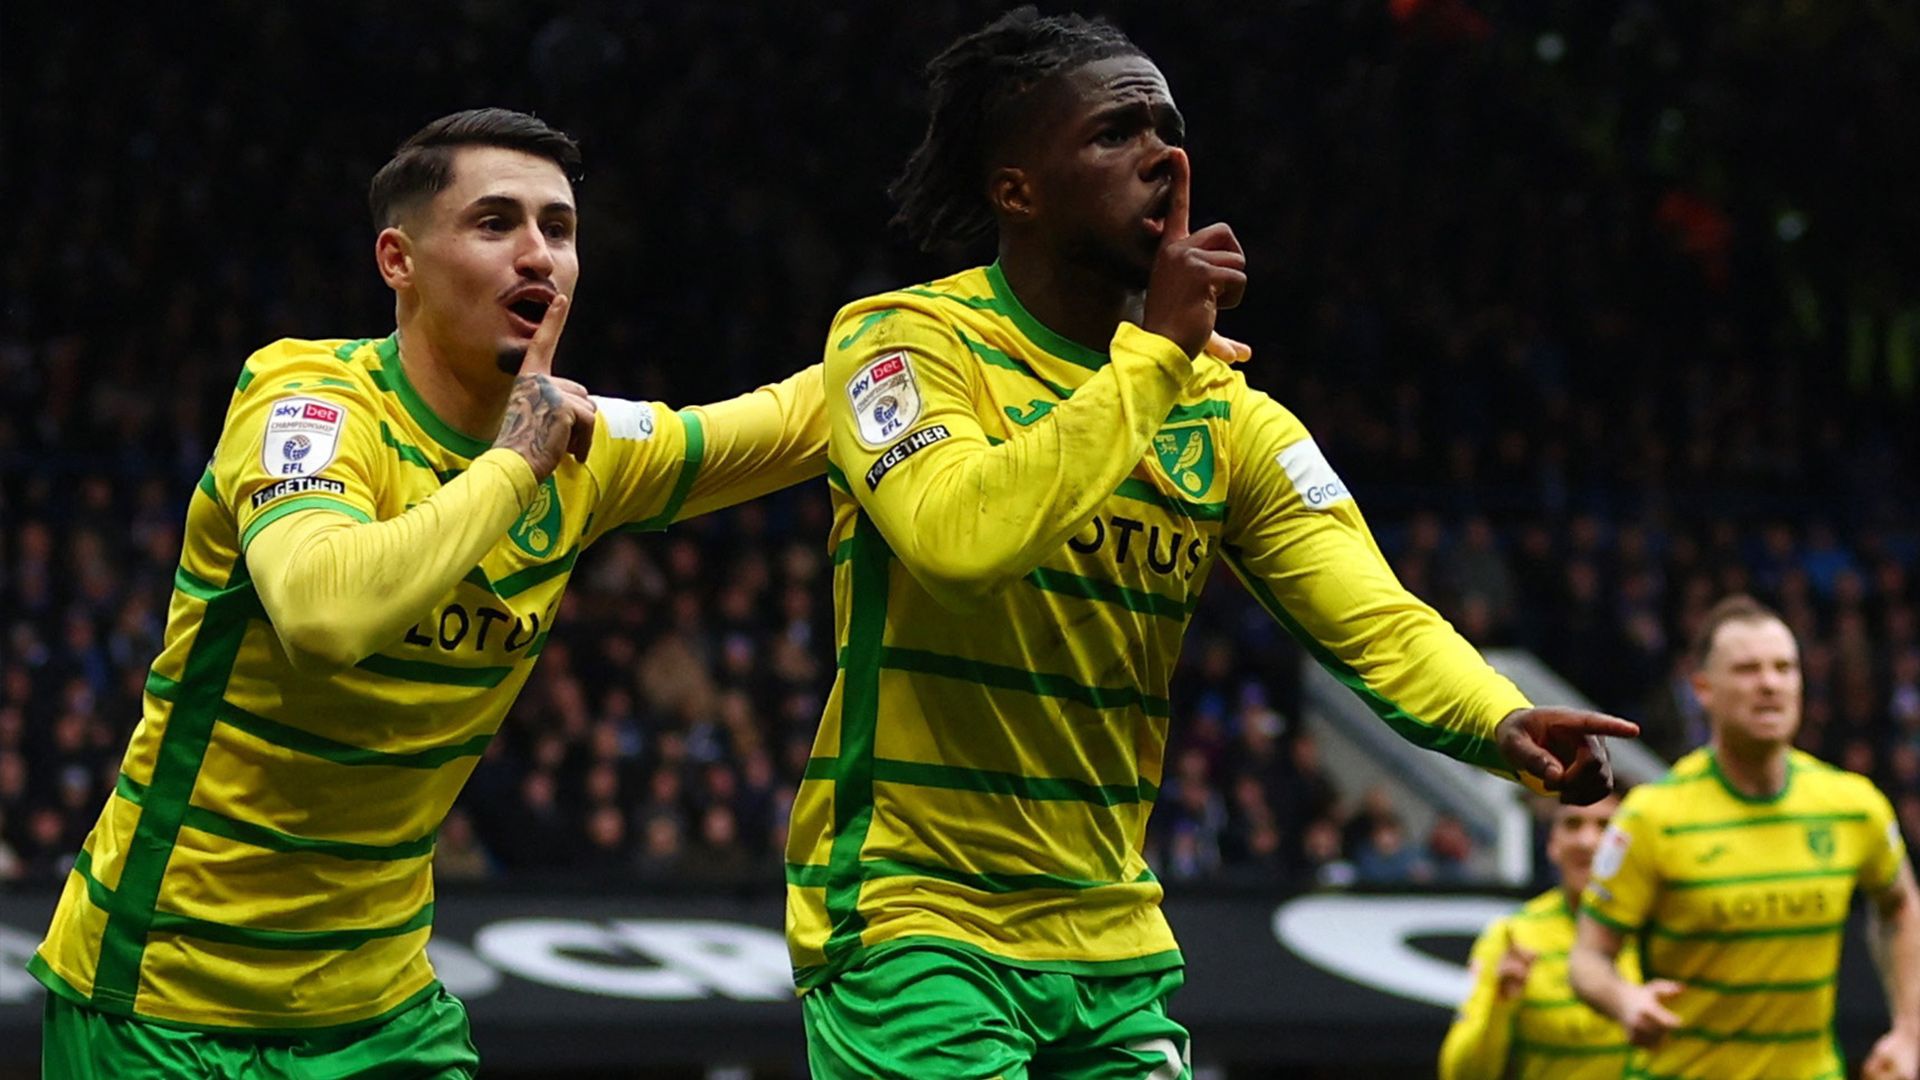 Every Norwich City player who realistically could leave by February 1st